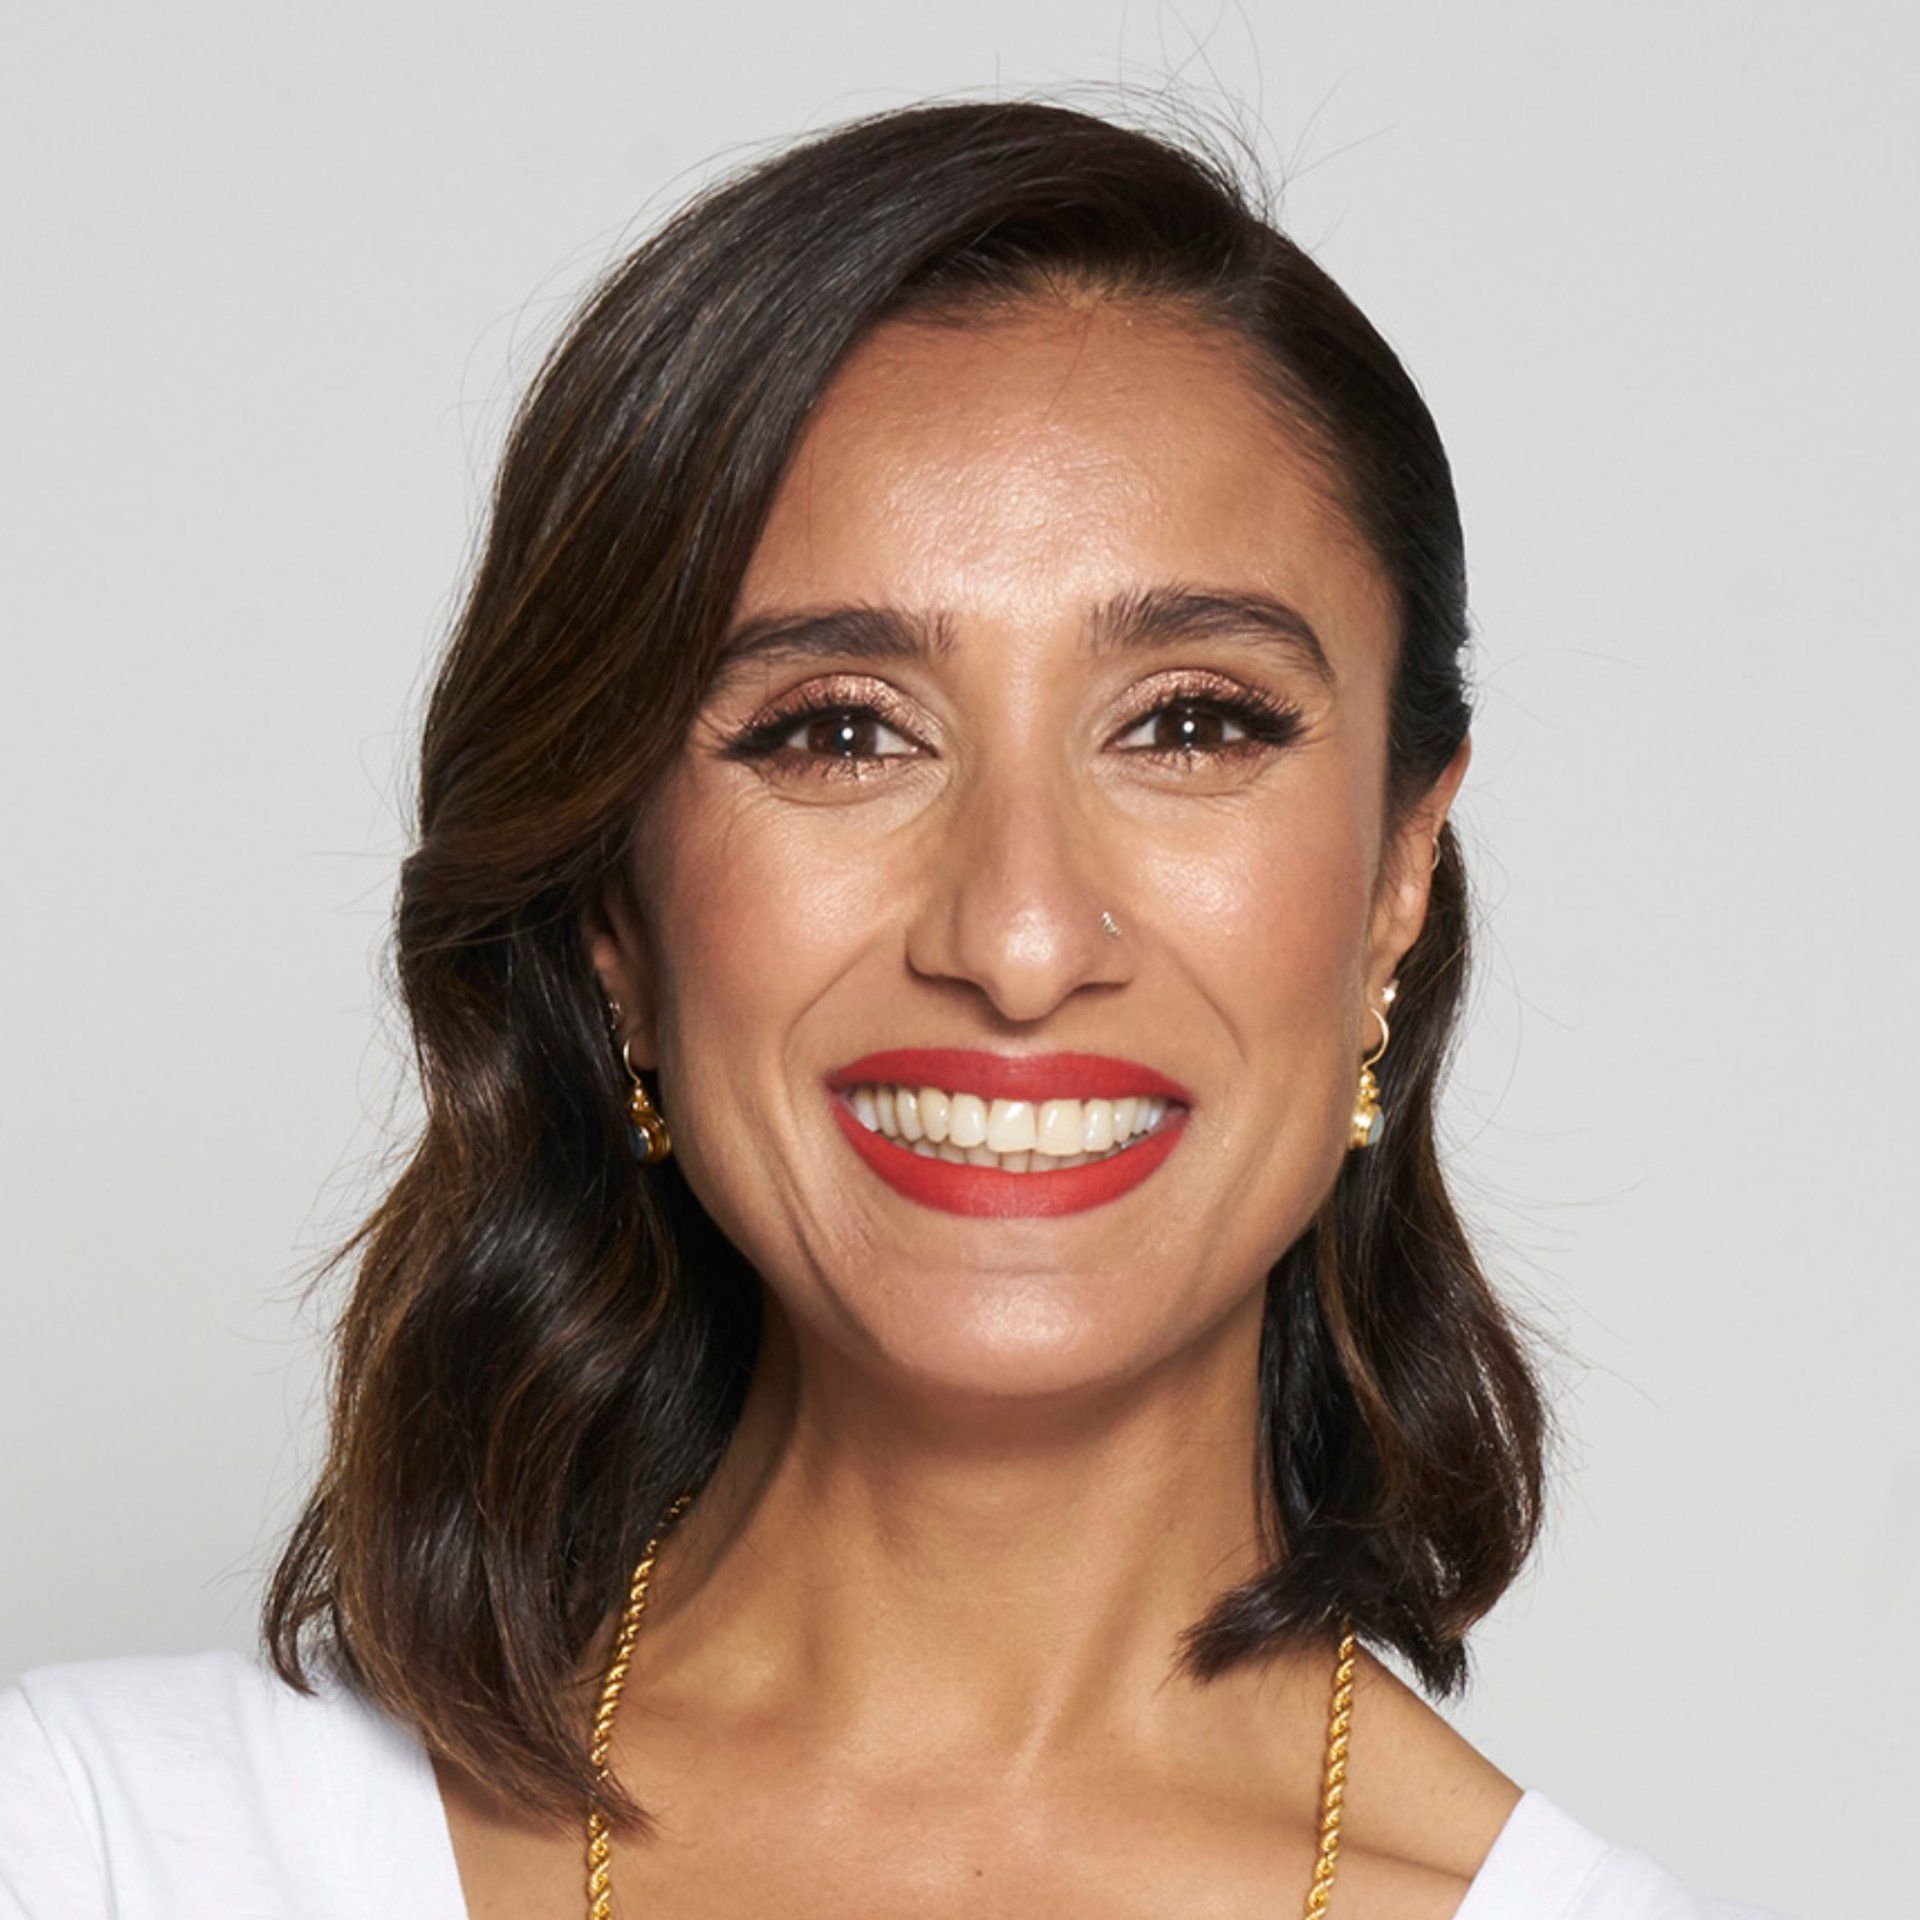 Anita Rani will be on the Live Stage at CrimeCon UK